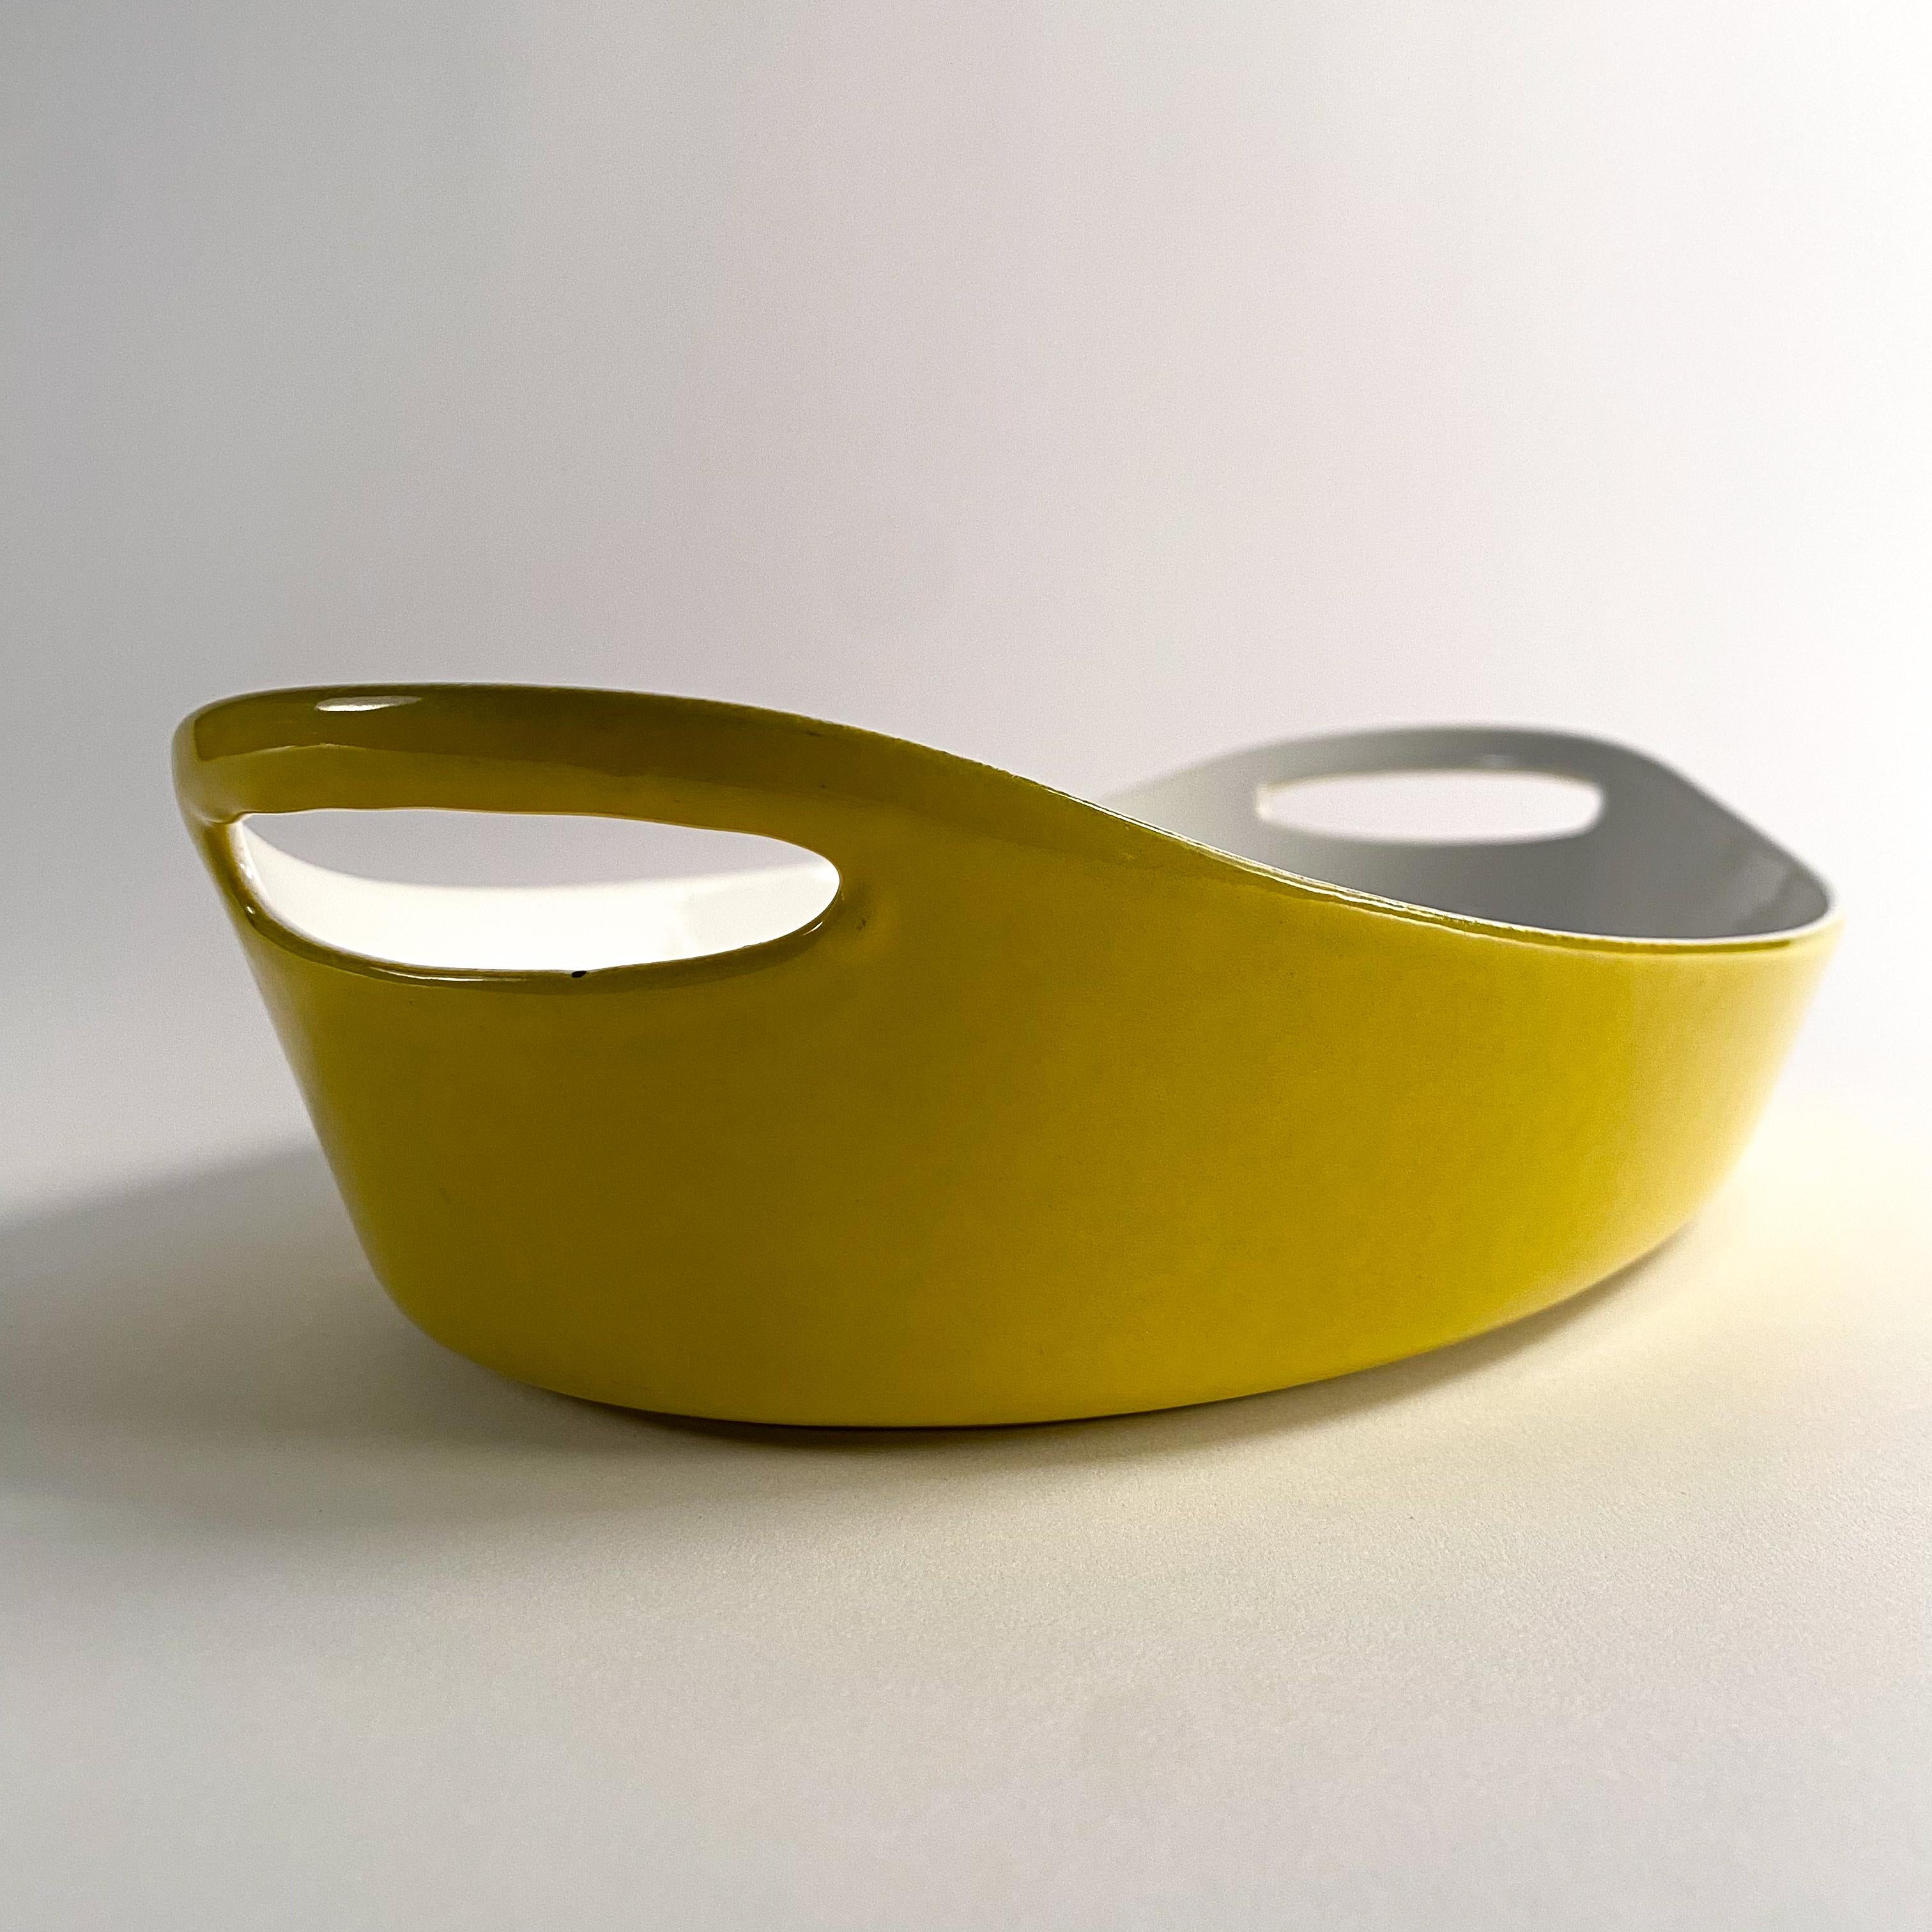 Late 20th Century vintage yellow enameled castiron casserole dish by Michael Lax for Copco For Sale